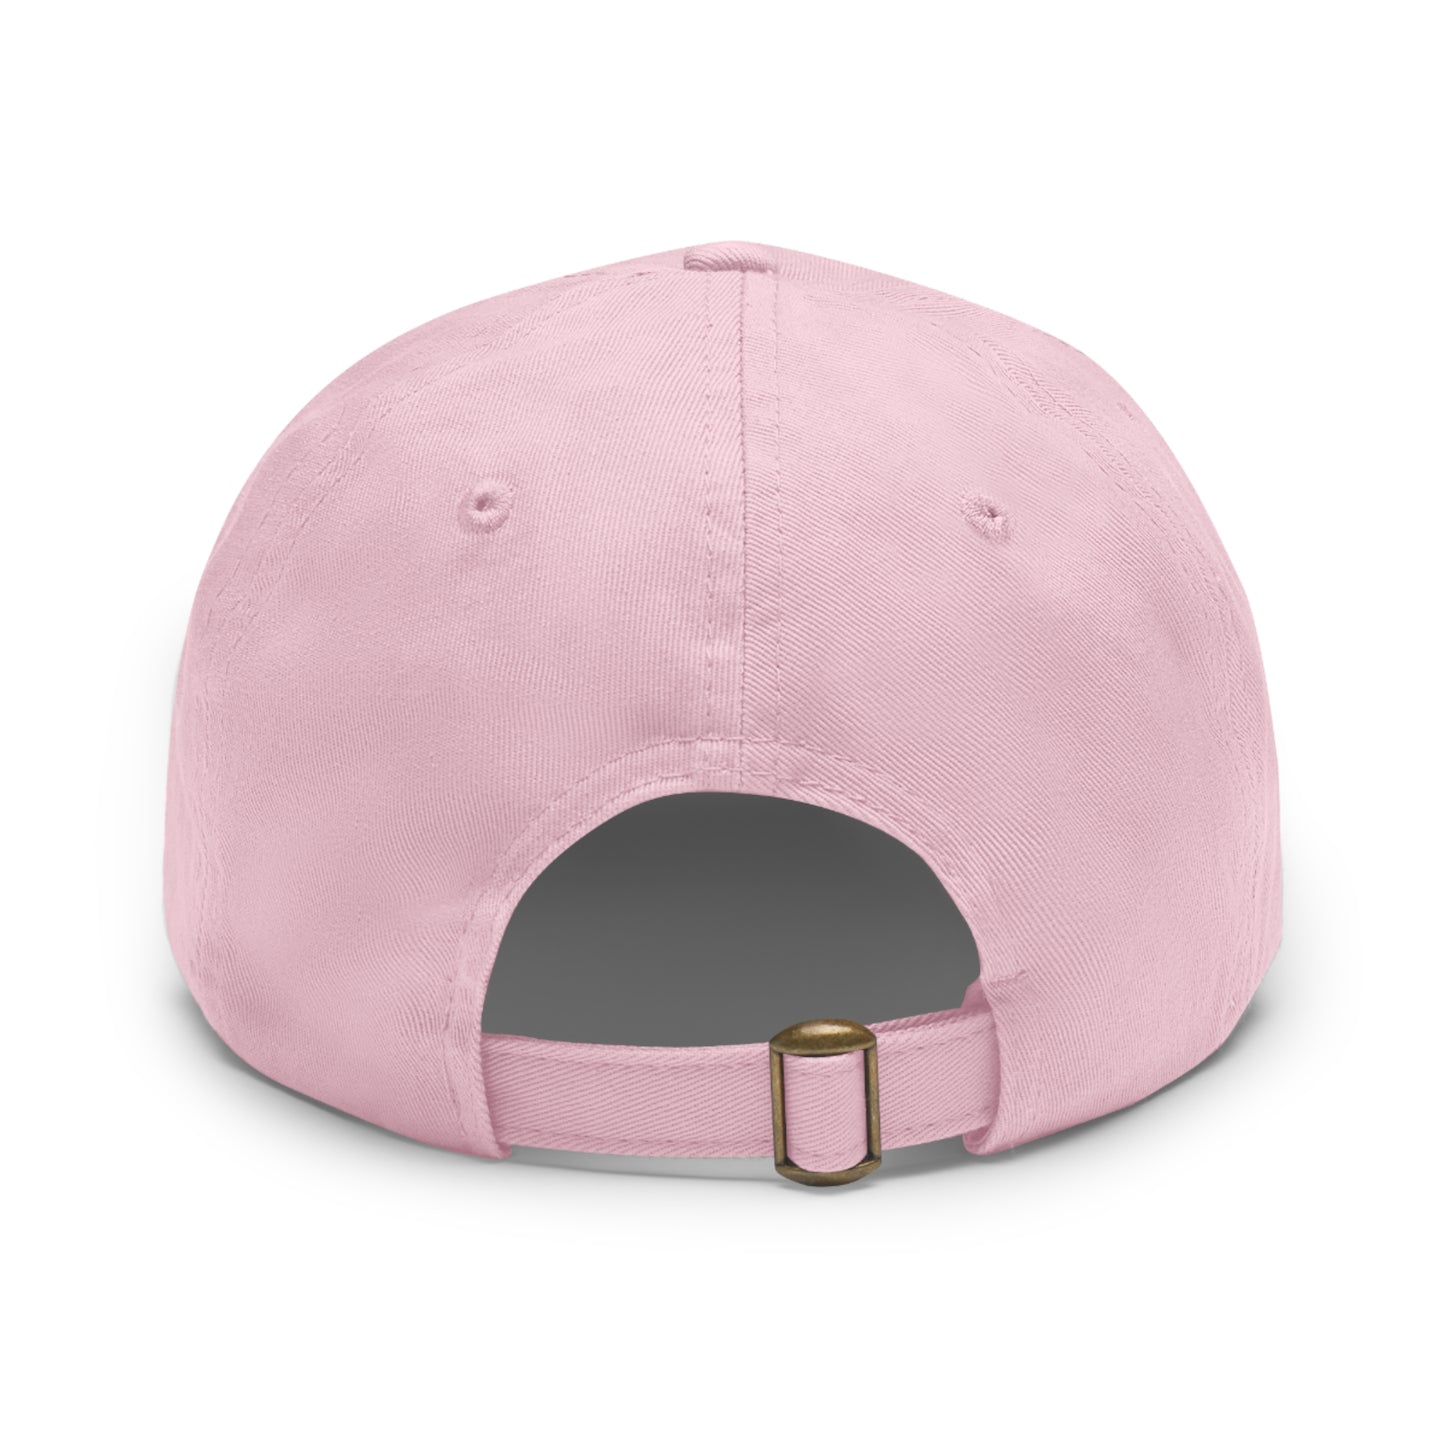 Thirsty Hooker TH 702 Dad Hat